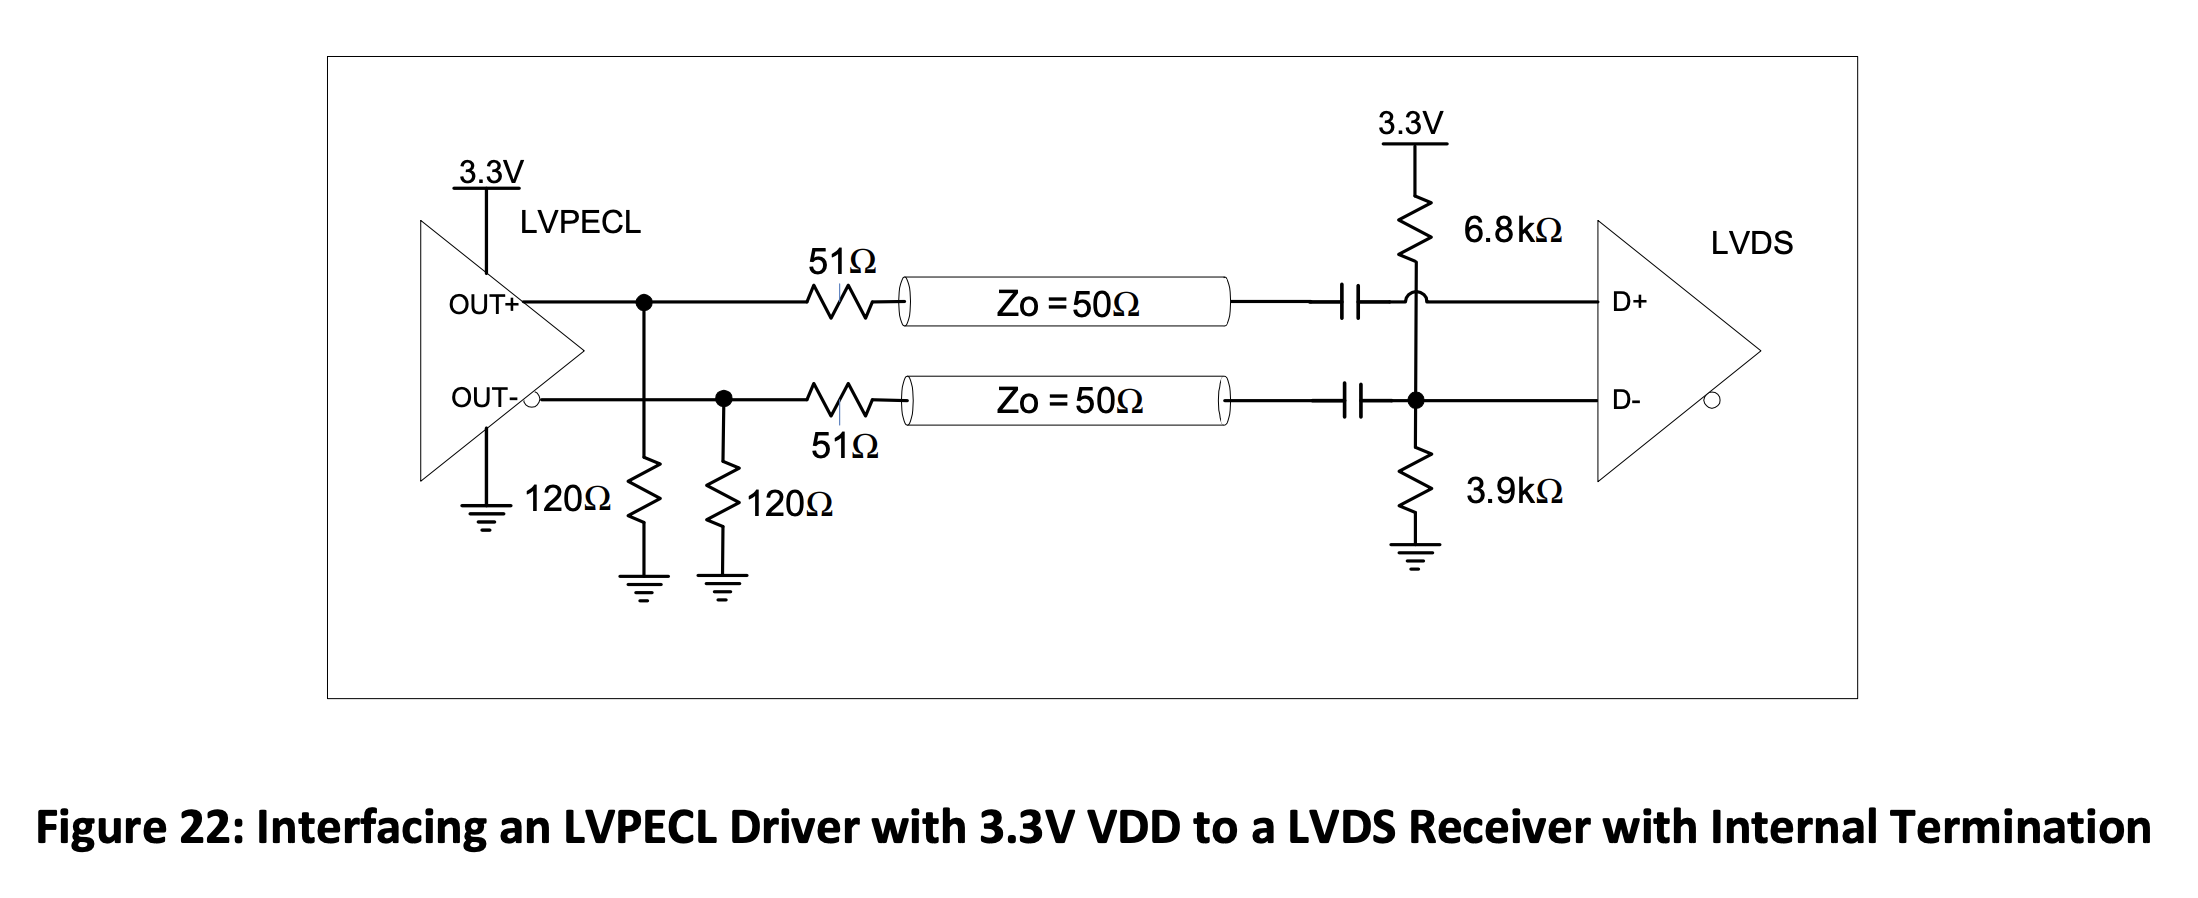 Figure 22 Interfacing an LVPECL Driver with a 3.3V VDD to a LVDS Receiver with Internal Termination